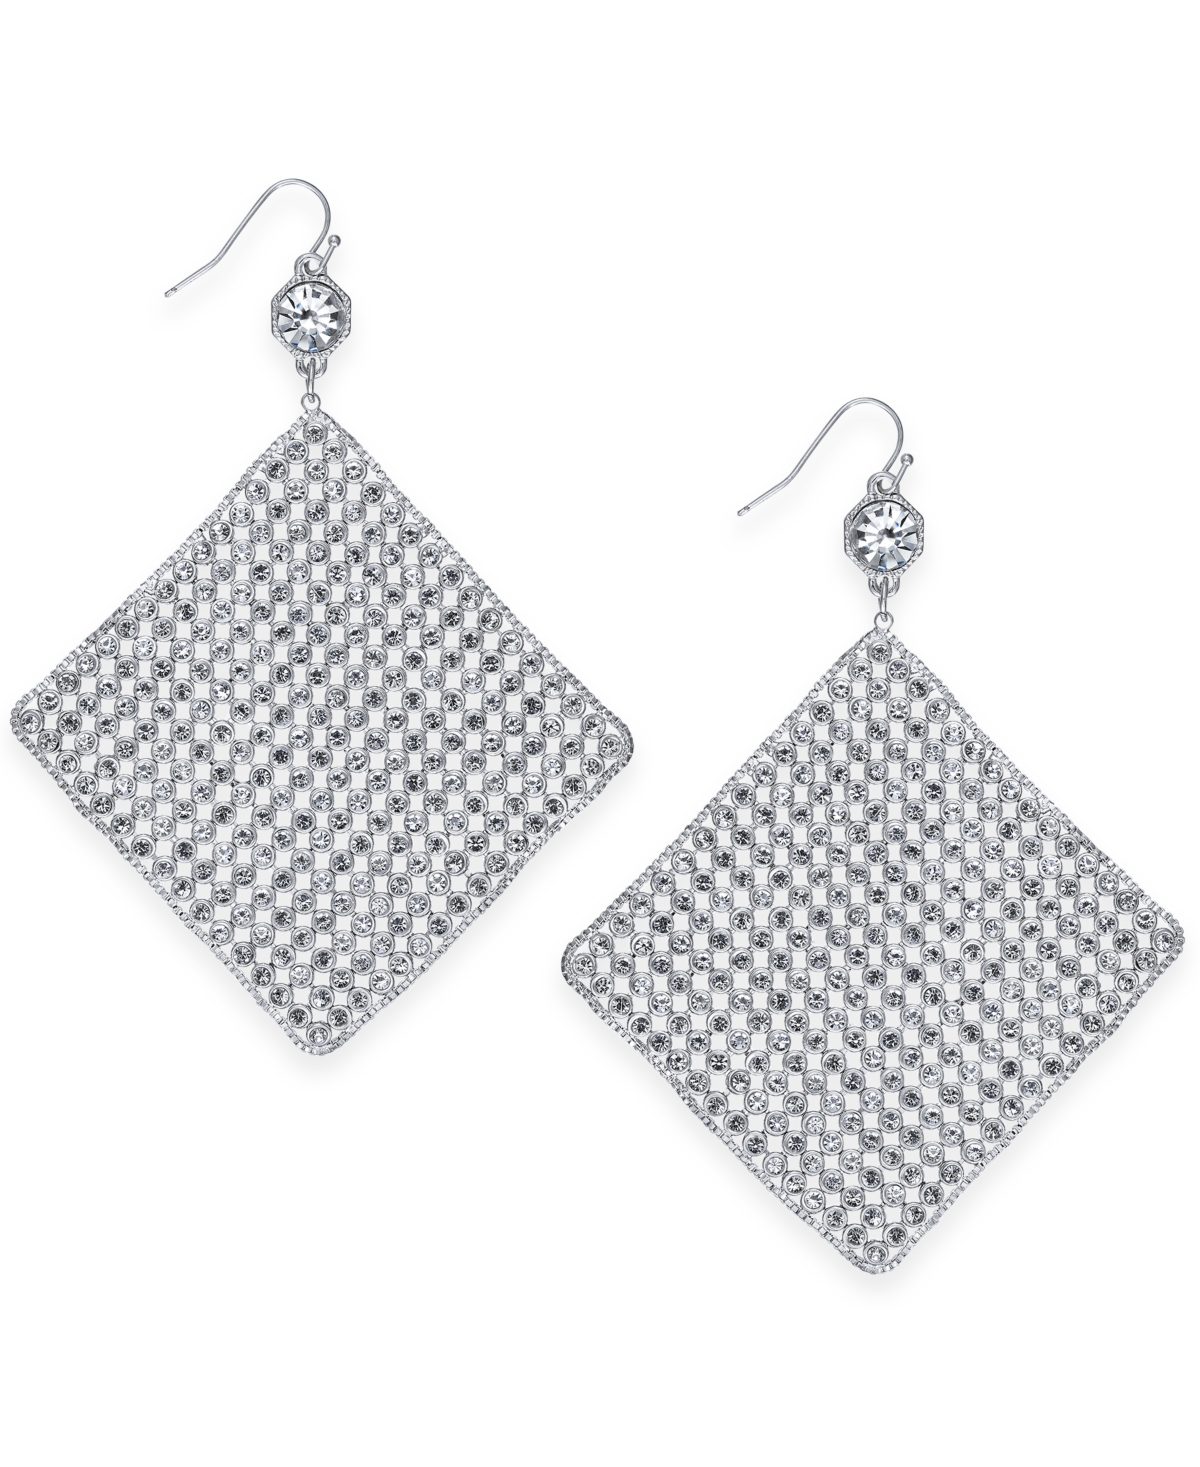 Silver-Tone Crystal Diamond-Shape Sheet Statement Earrings, Created for Macy's - Crystal